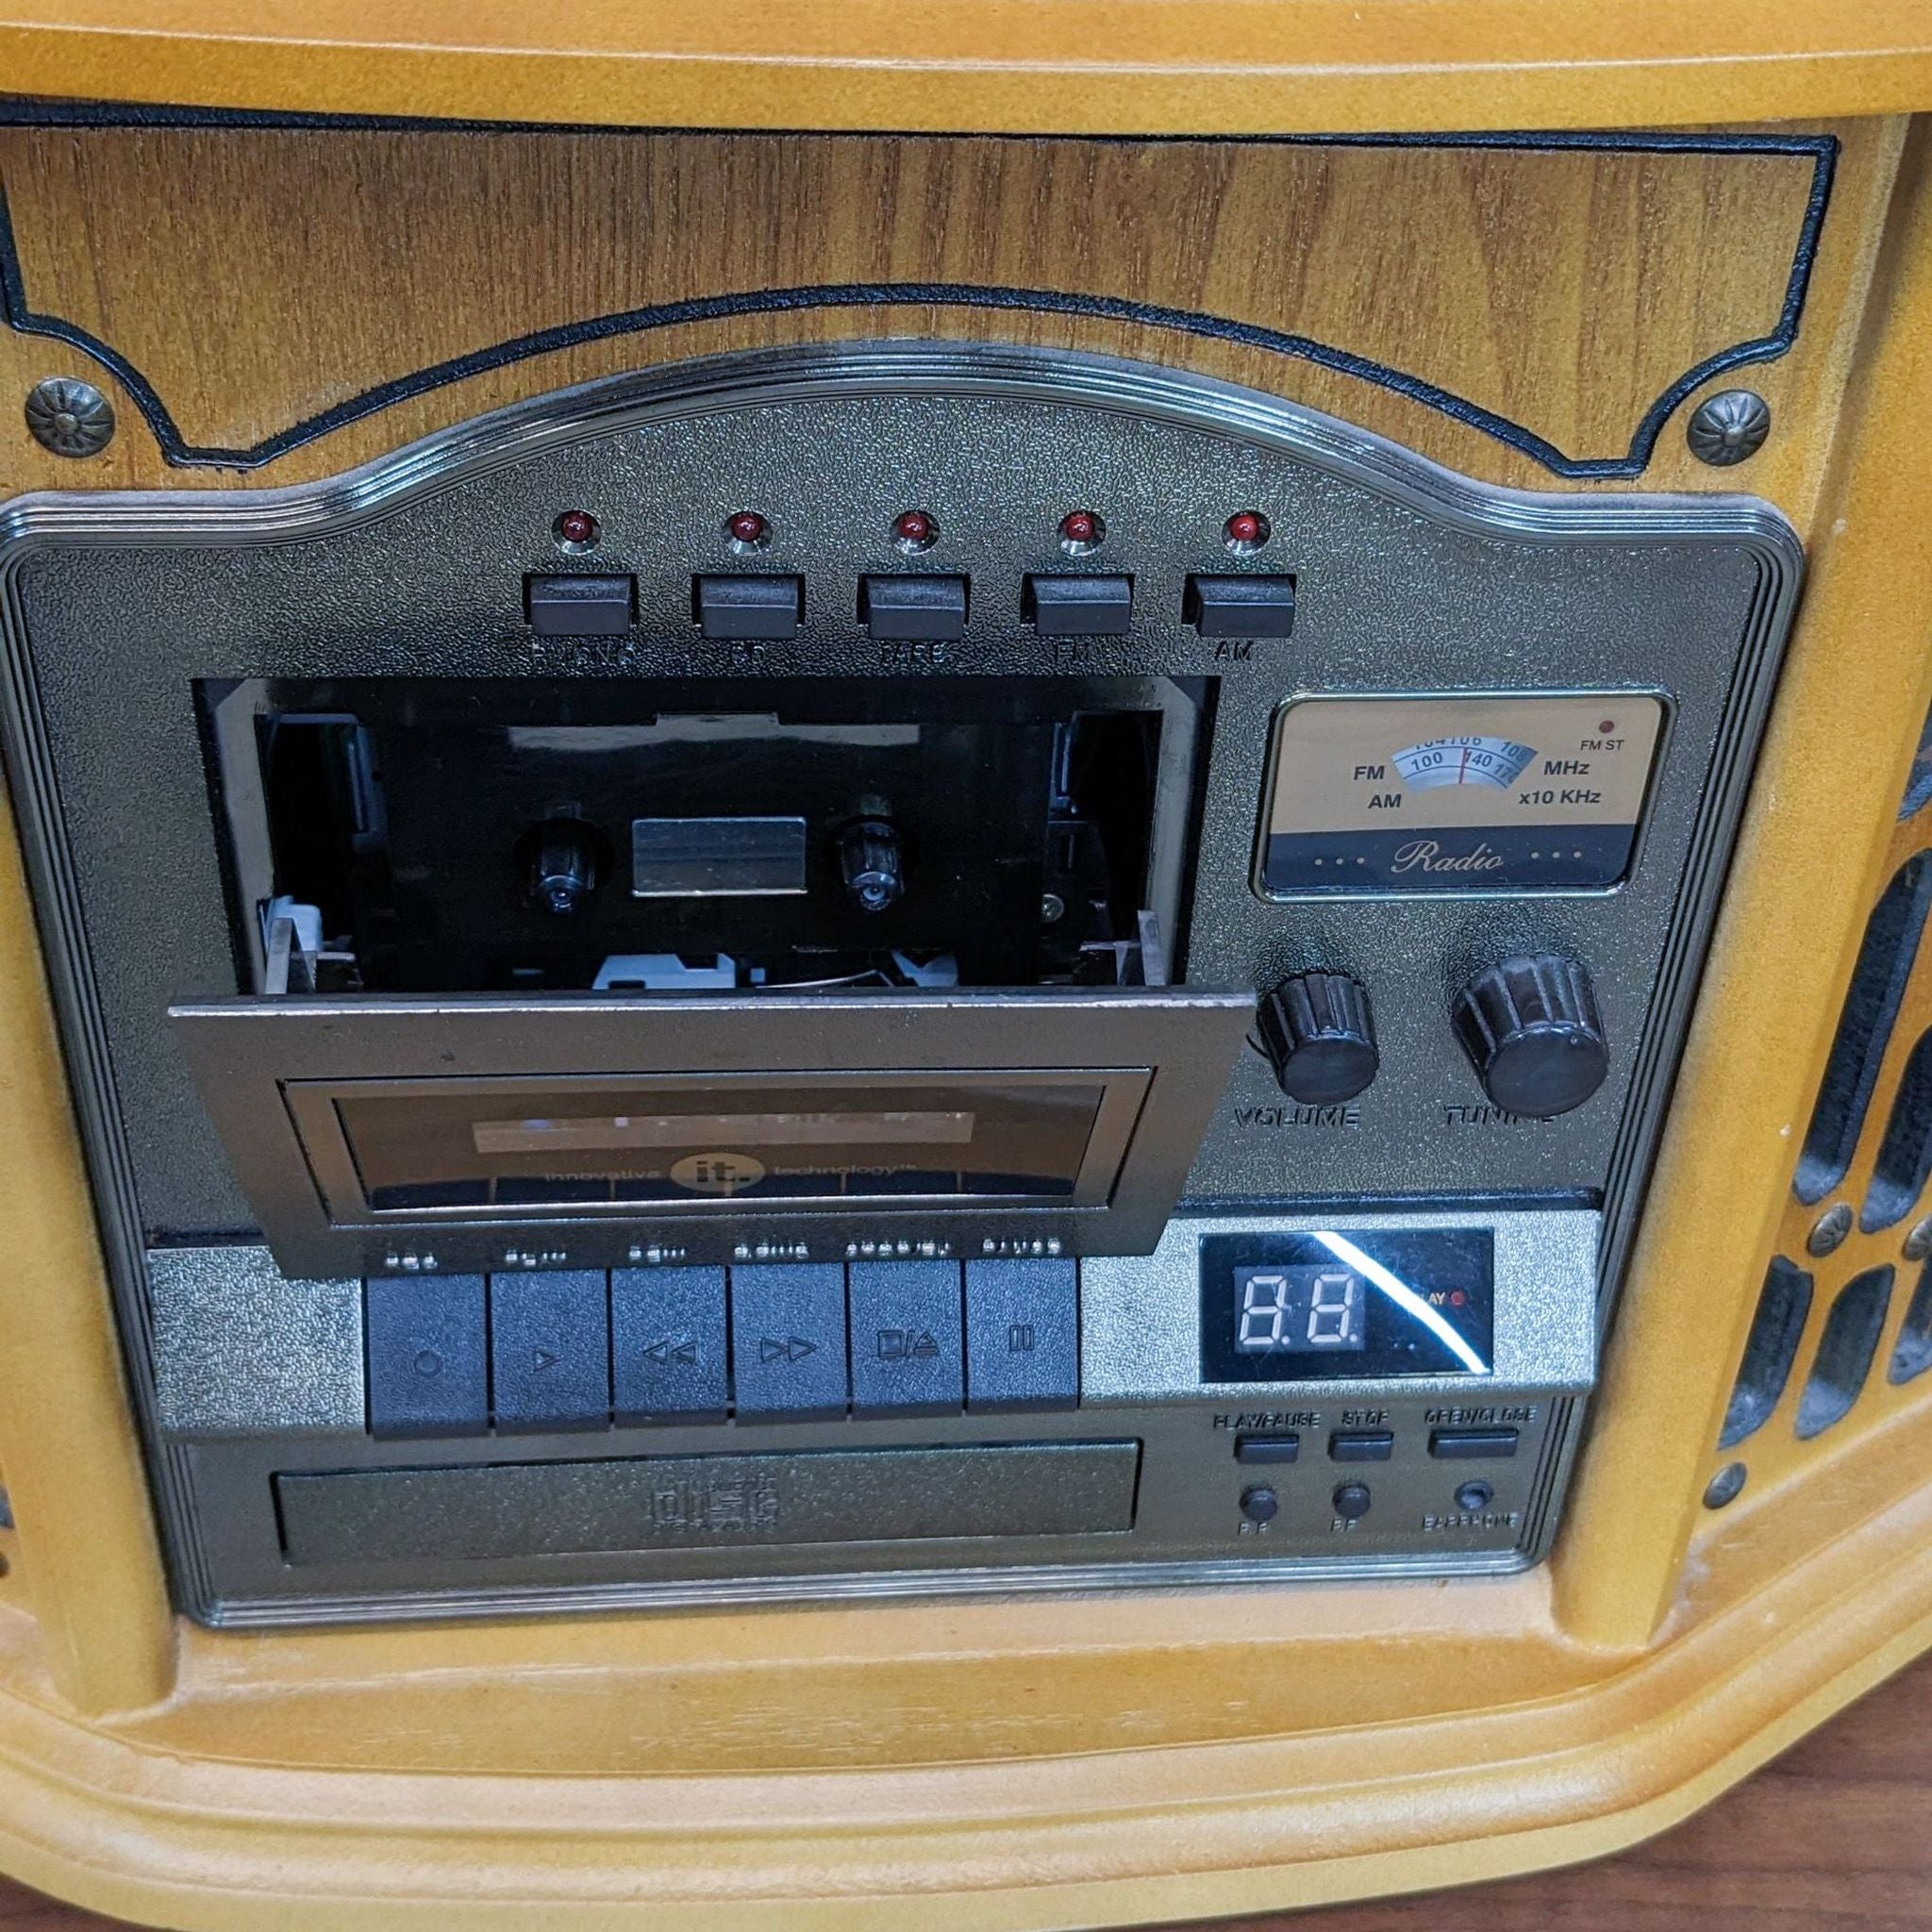 Cassette and control panel of the ITRR-401, showcasing retro design with a modern display.